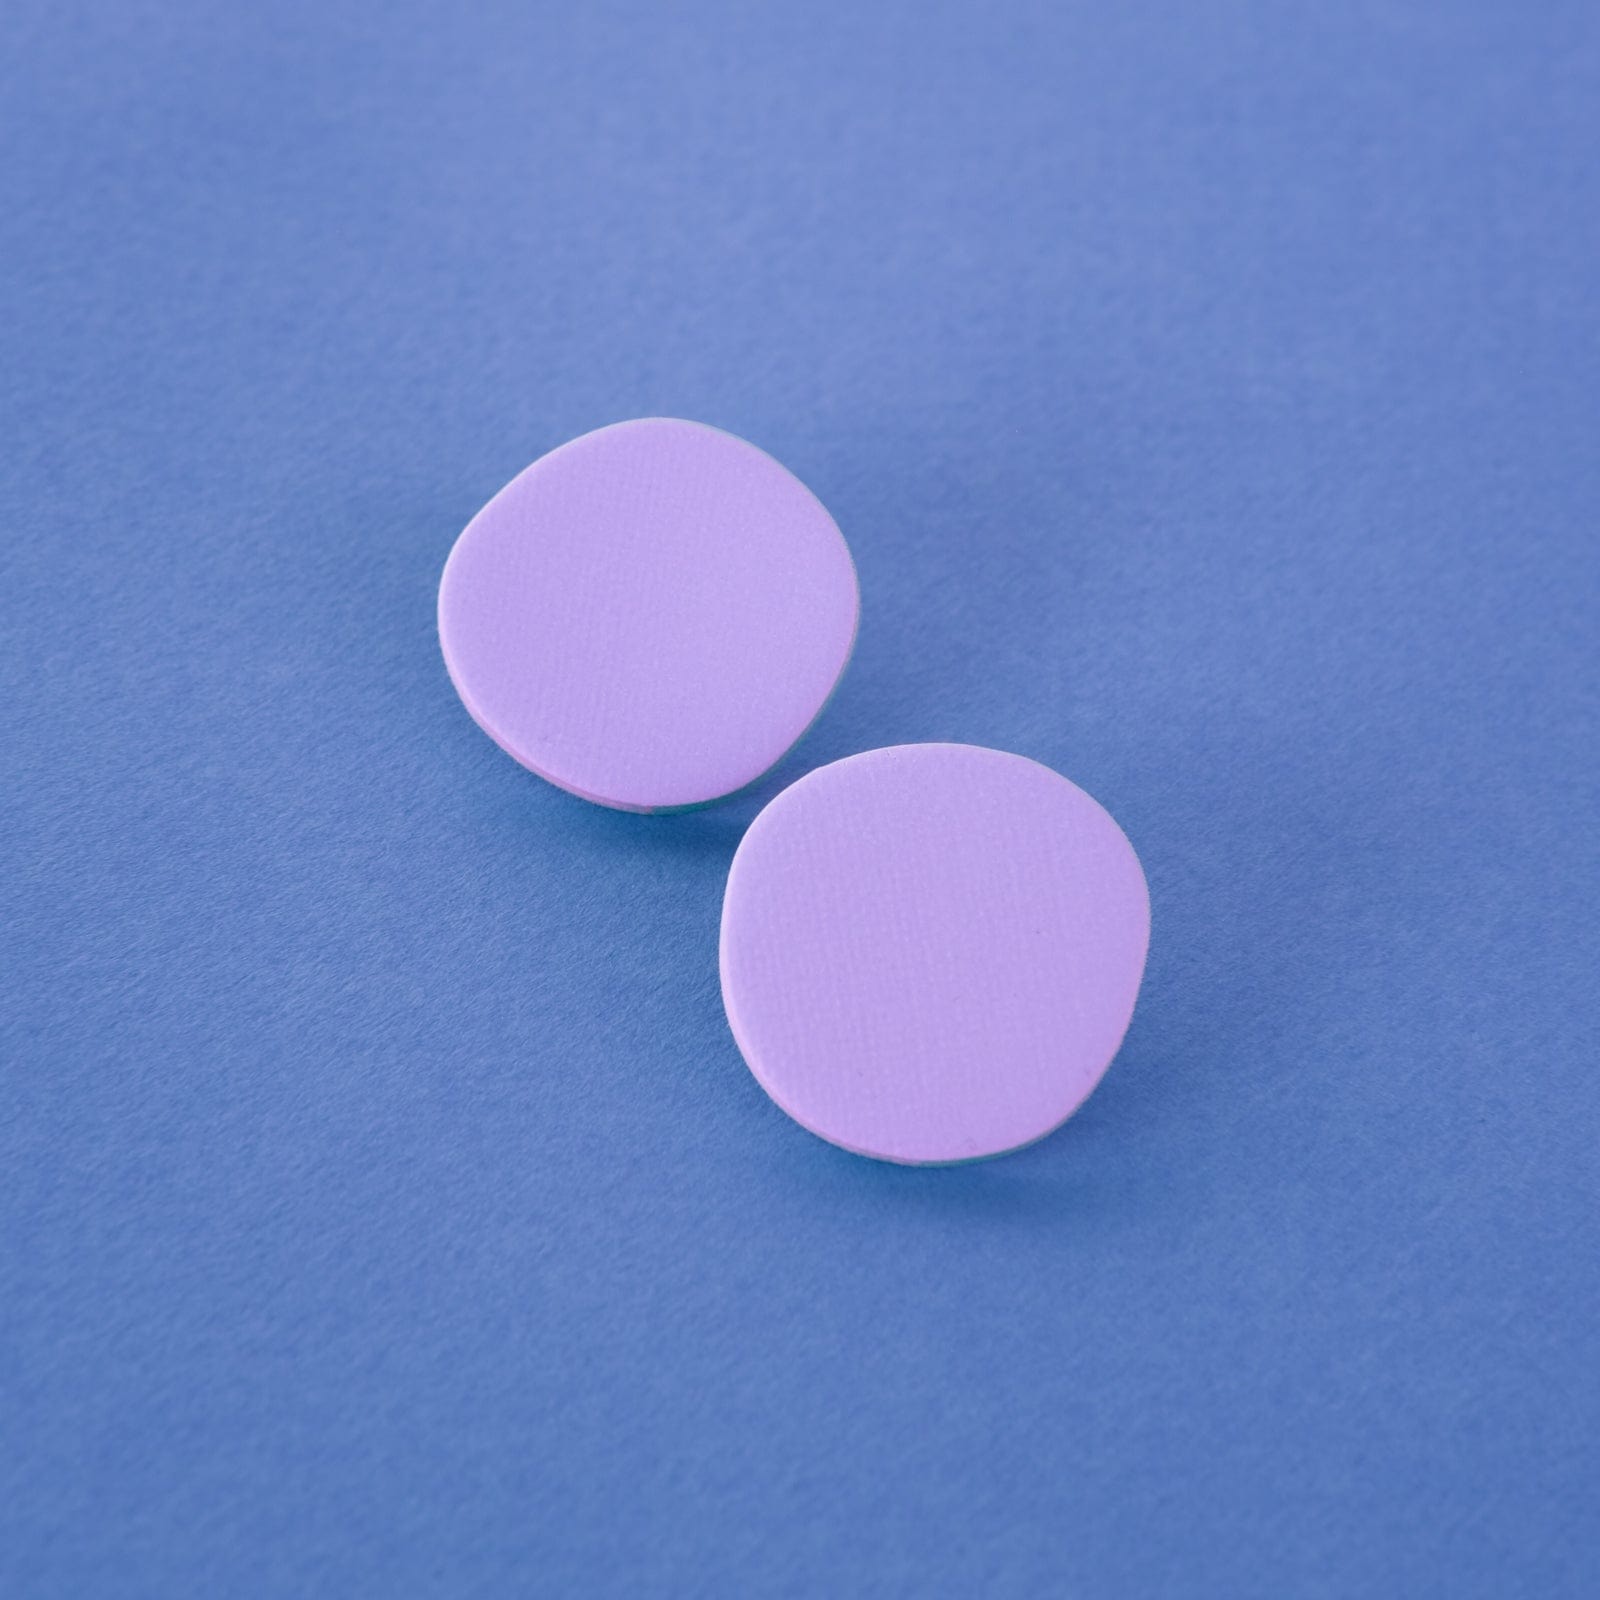 Miro inspired organic round shaped studs with canvas texture in lavender #color_lavender